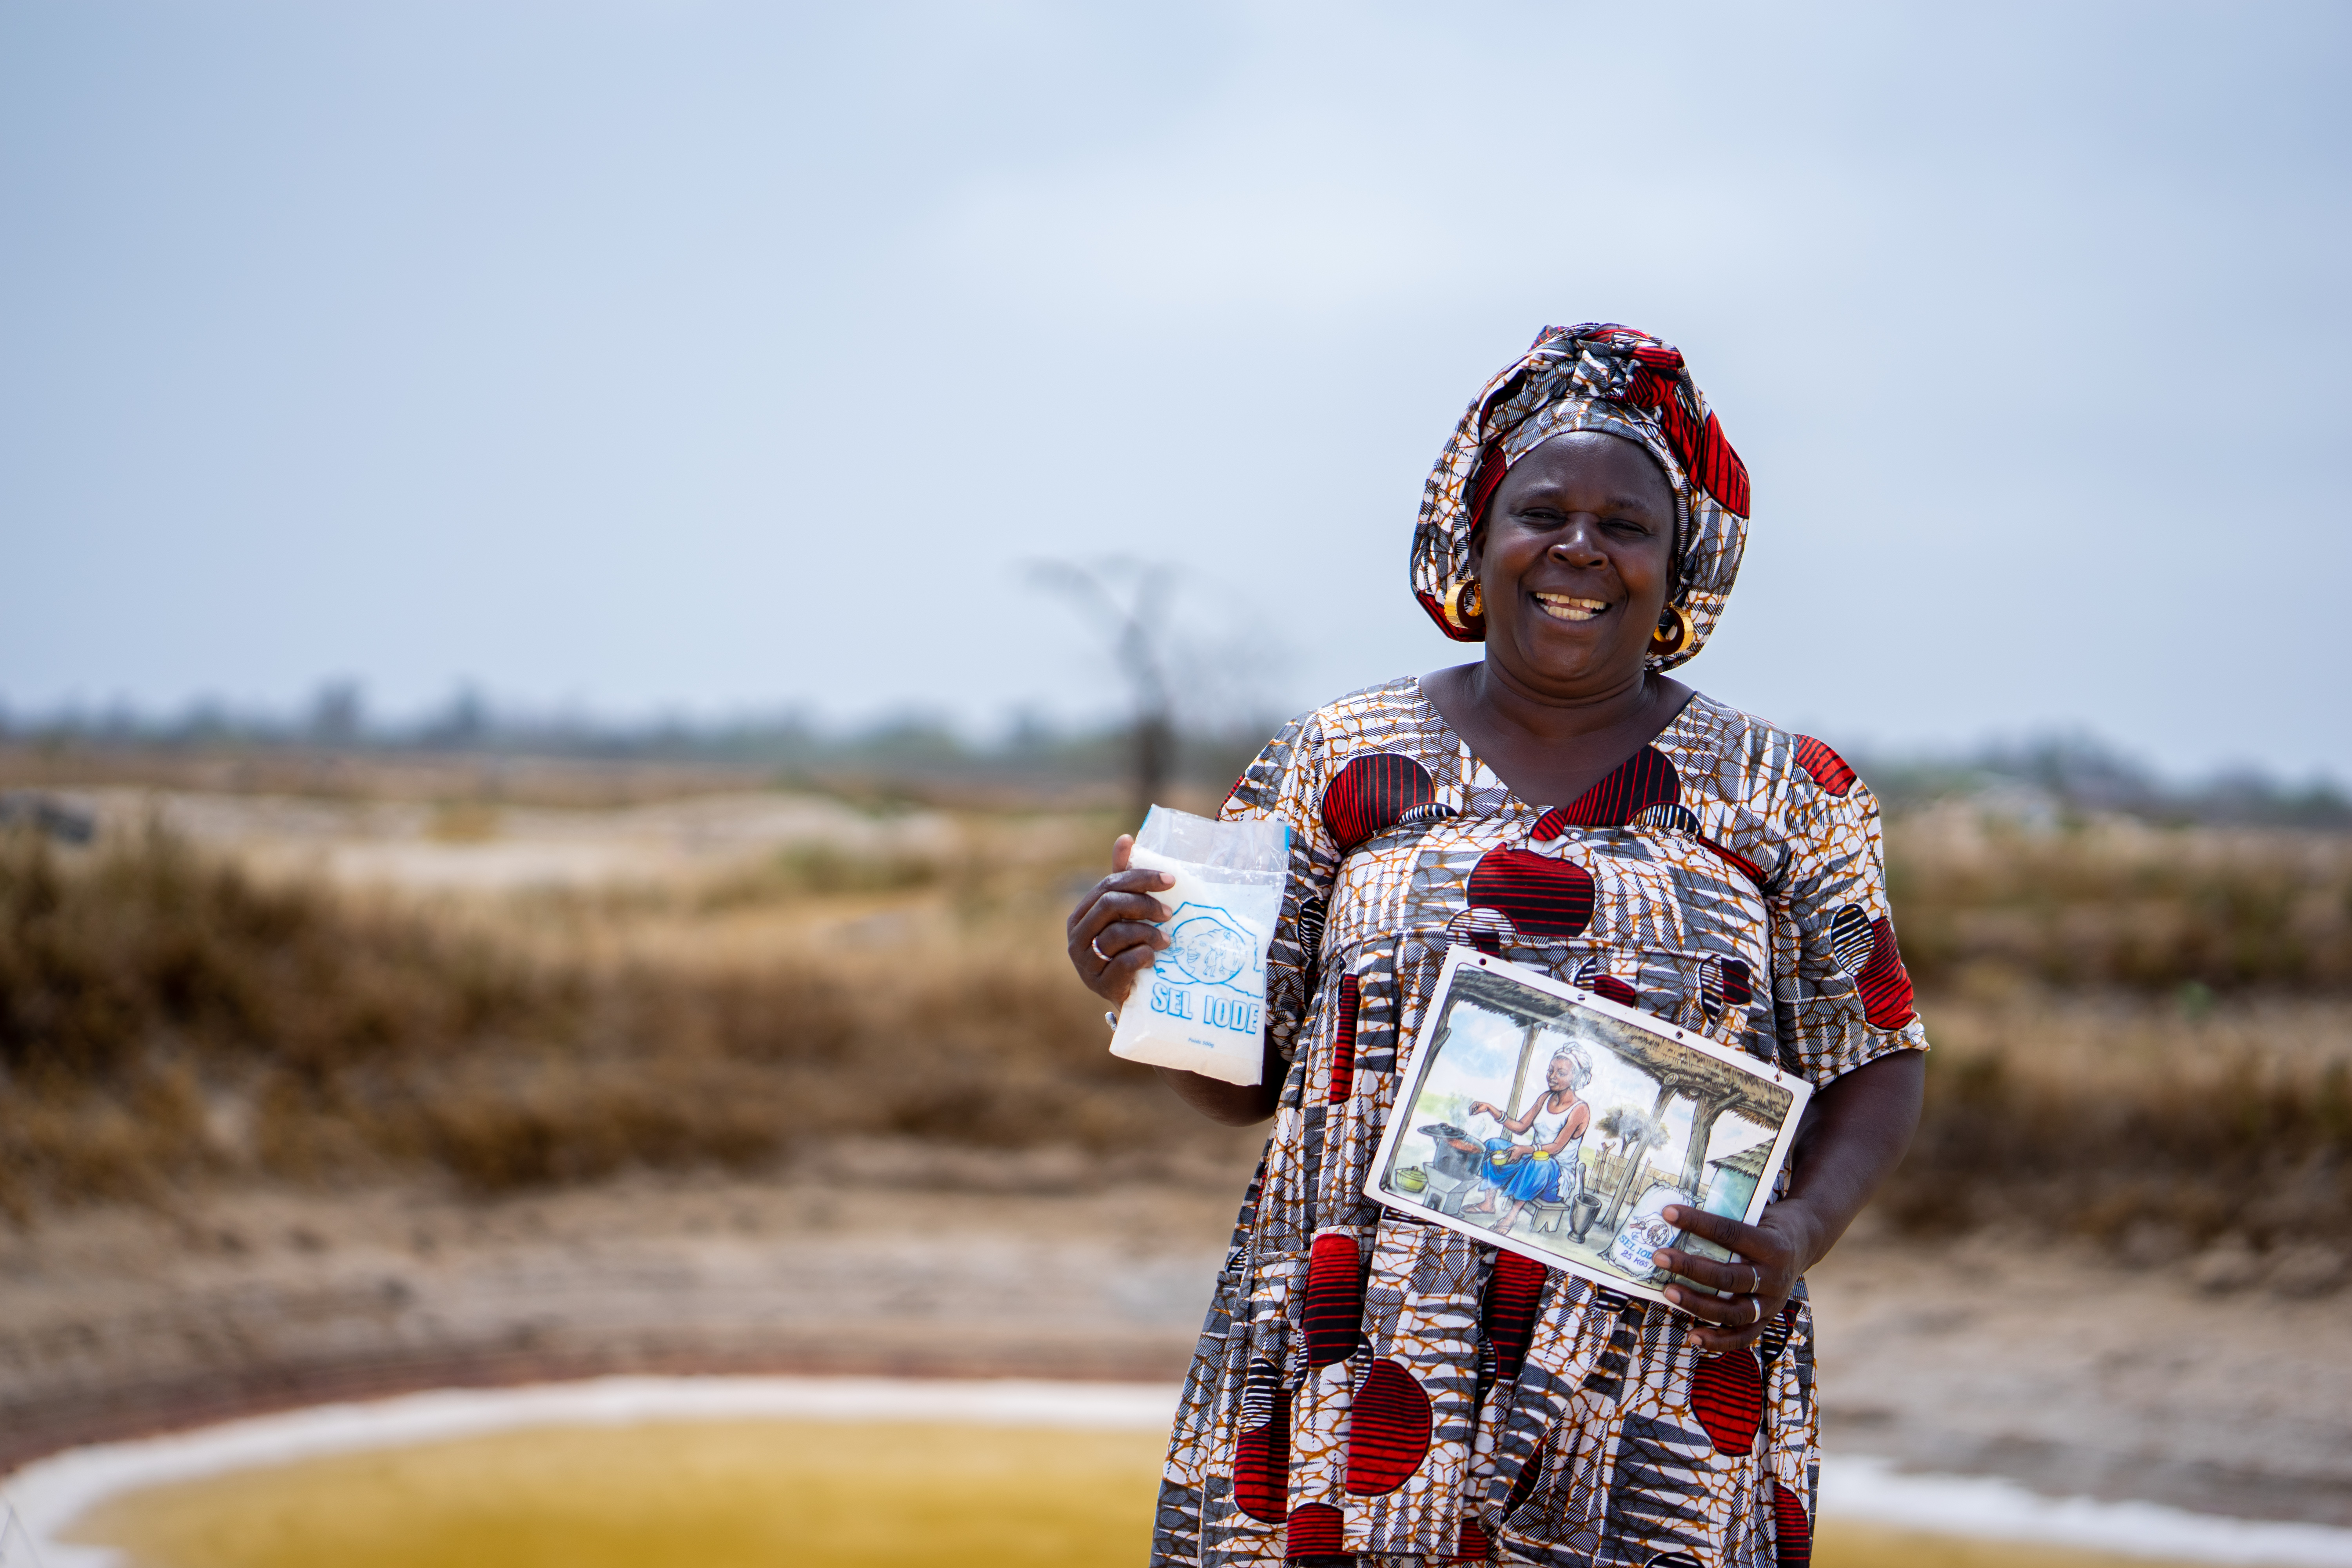 A woman holds up a phamplet on salt iodization and smiles at the camera.